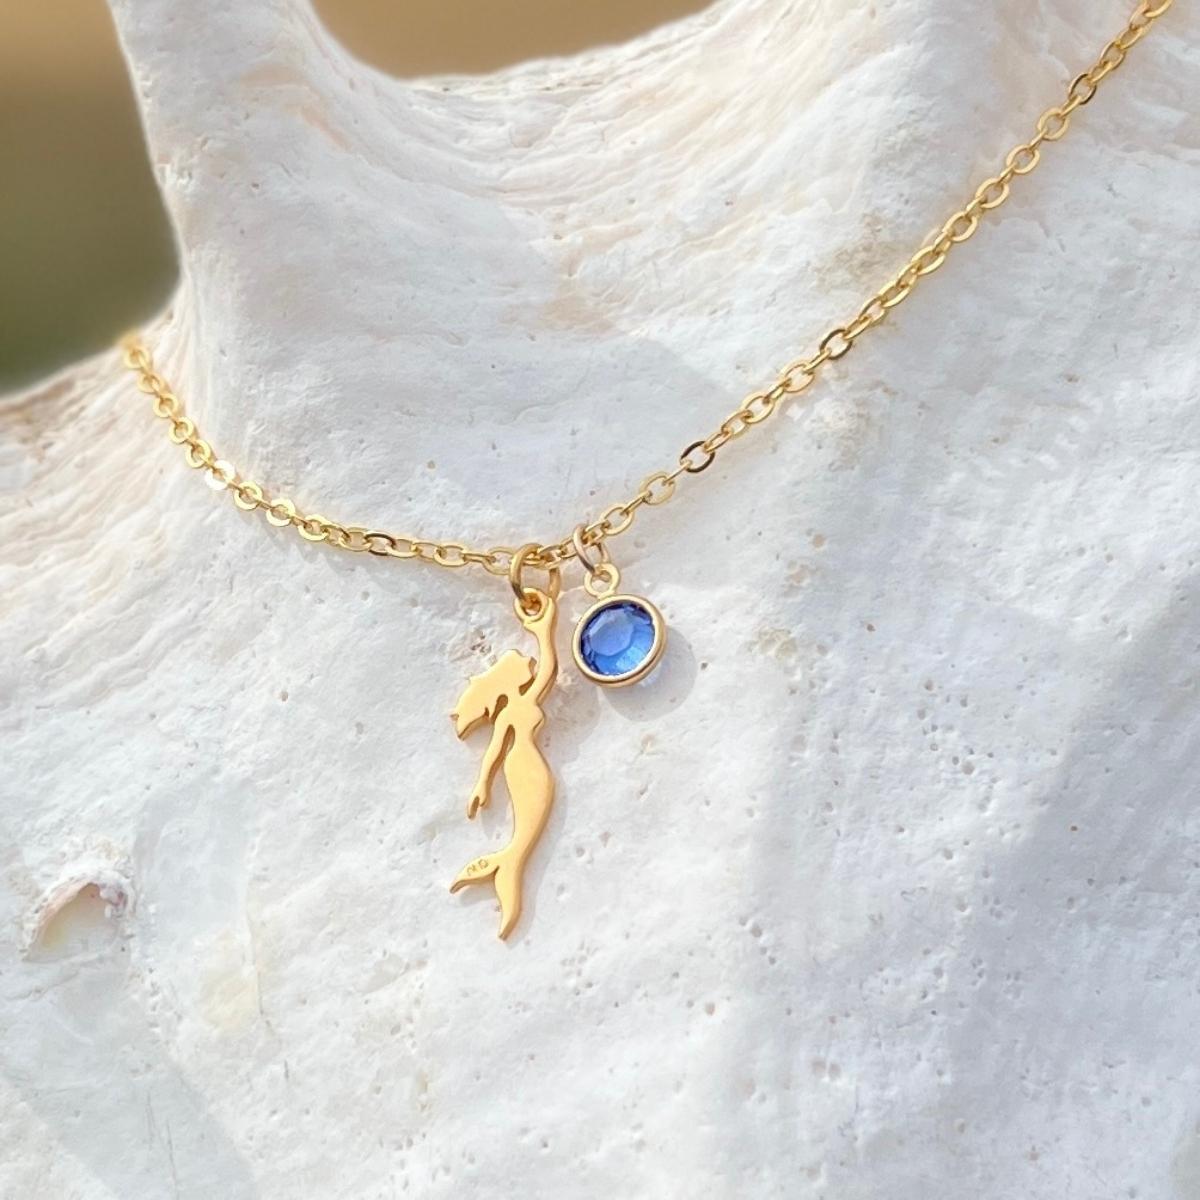 Miss Scuba Mermaid Necklace with Swarovski Crystal, Gold Filled over Sterling Silver This piece reflects Miss Scuba's sense of mystery and individuality, and beckons the free spirit in every self-made women.  Mermaids symbolize Love, Beauty, Mystery, Untamed Spirit and Femininity.